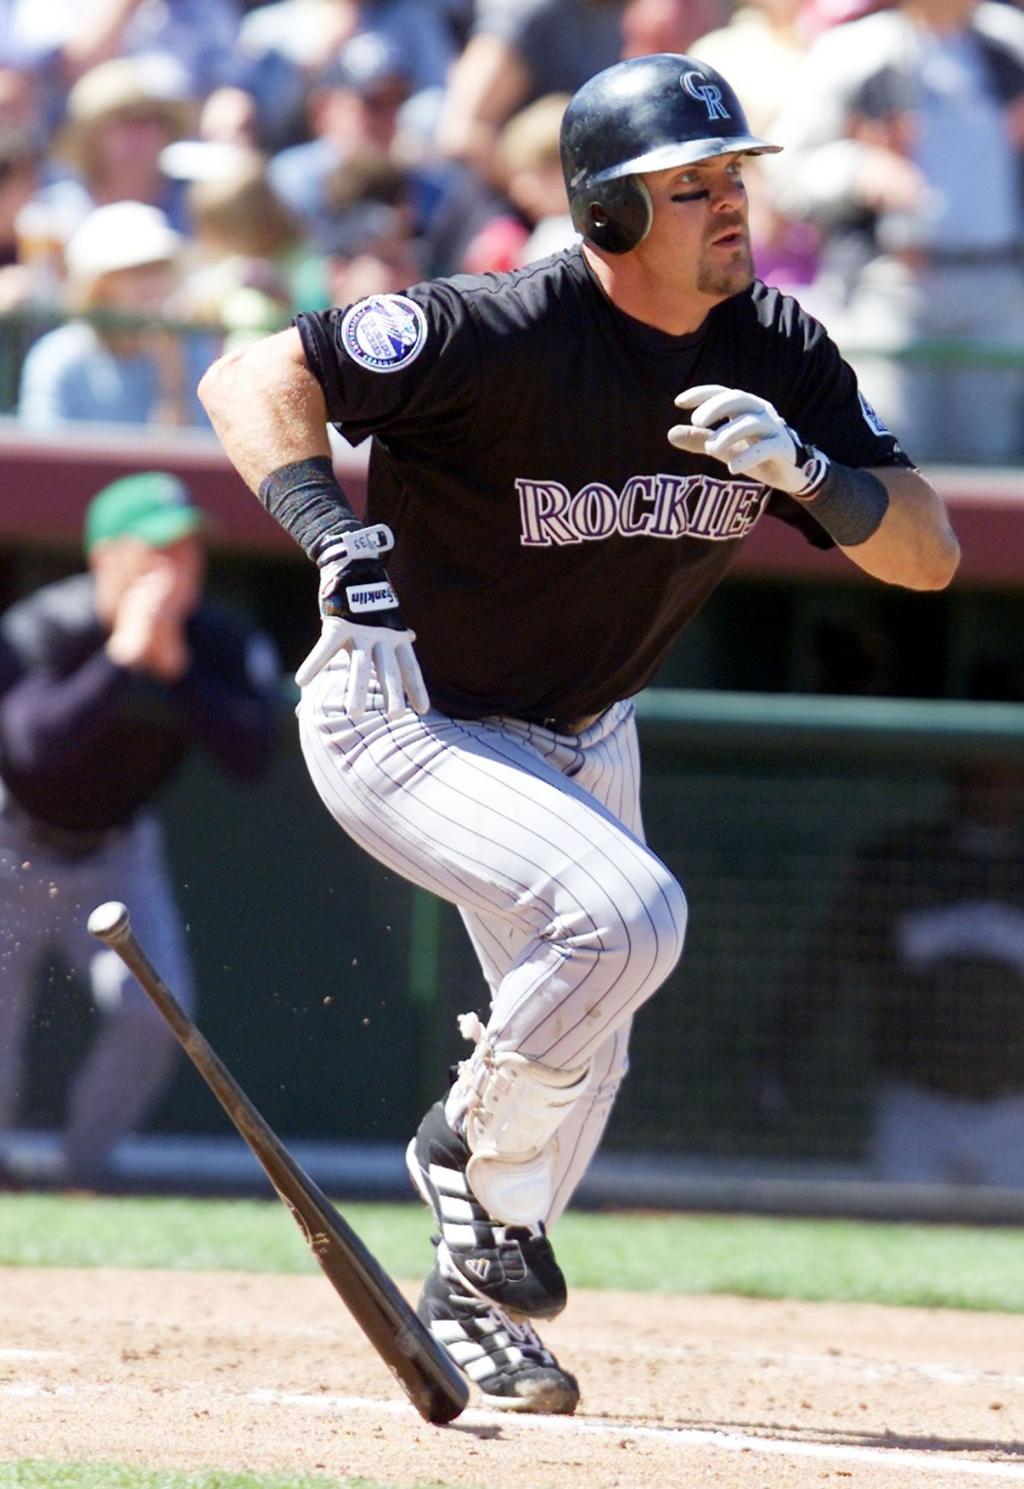 Colorado Rockies supposed to retire Larry Walker's No. 33 jersey